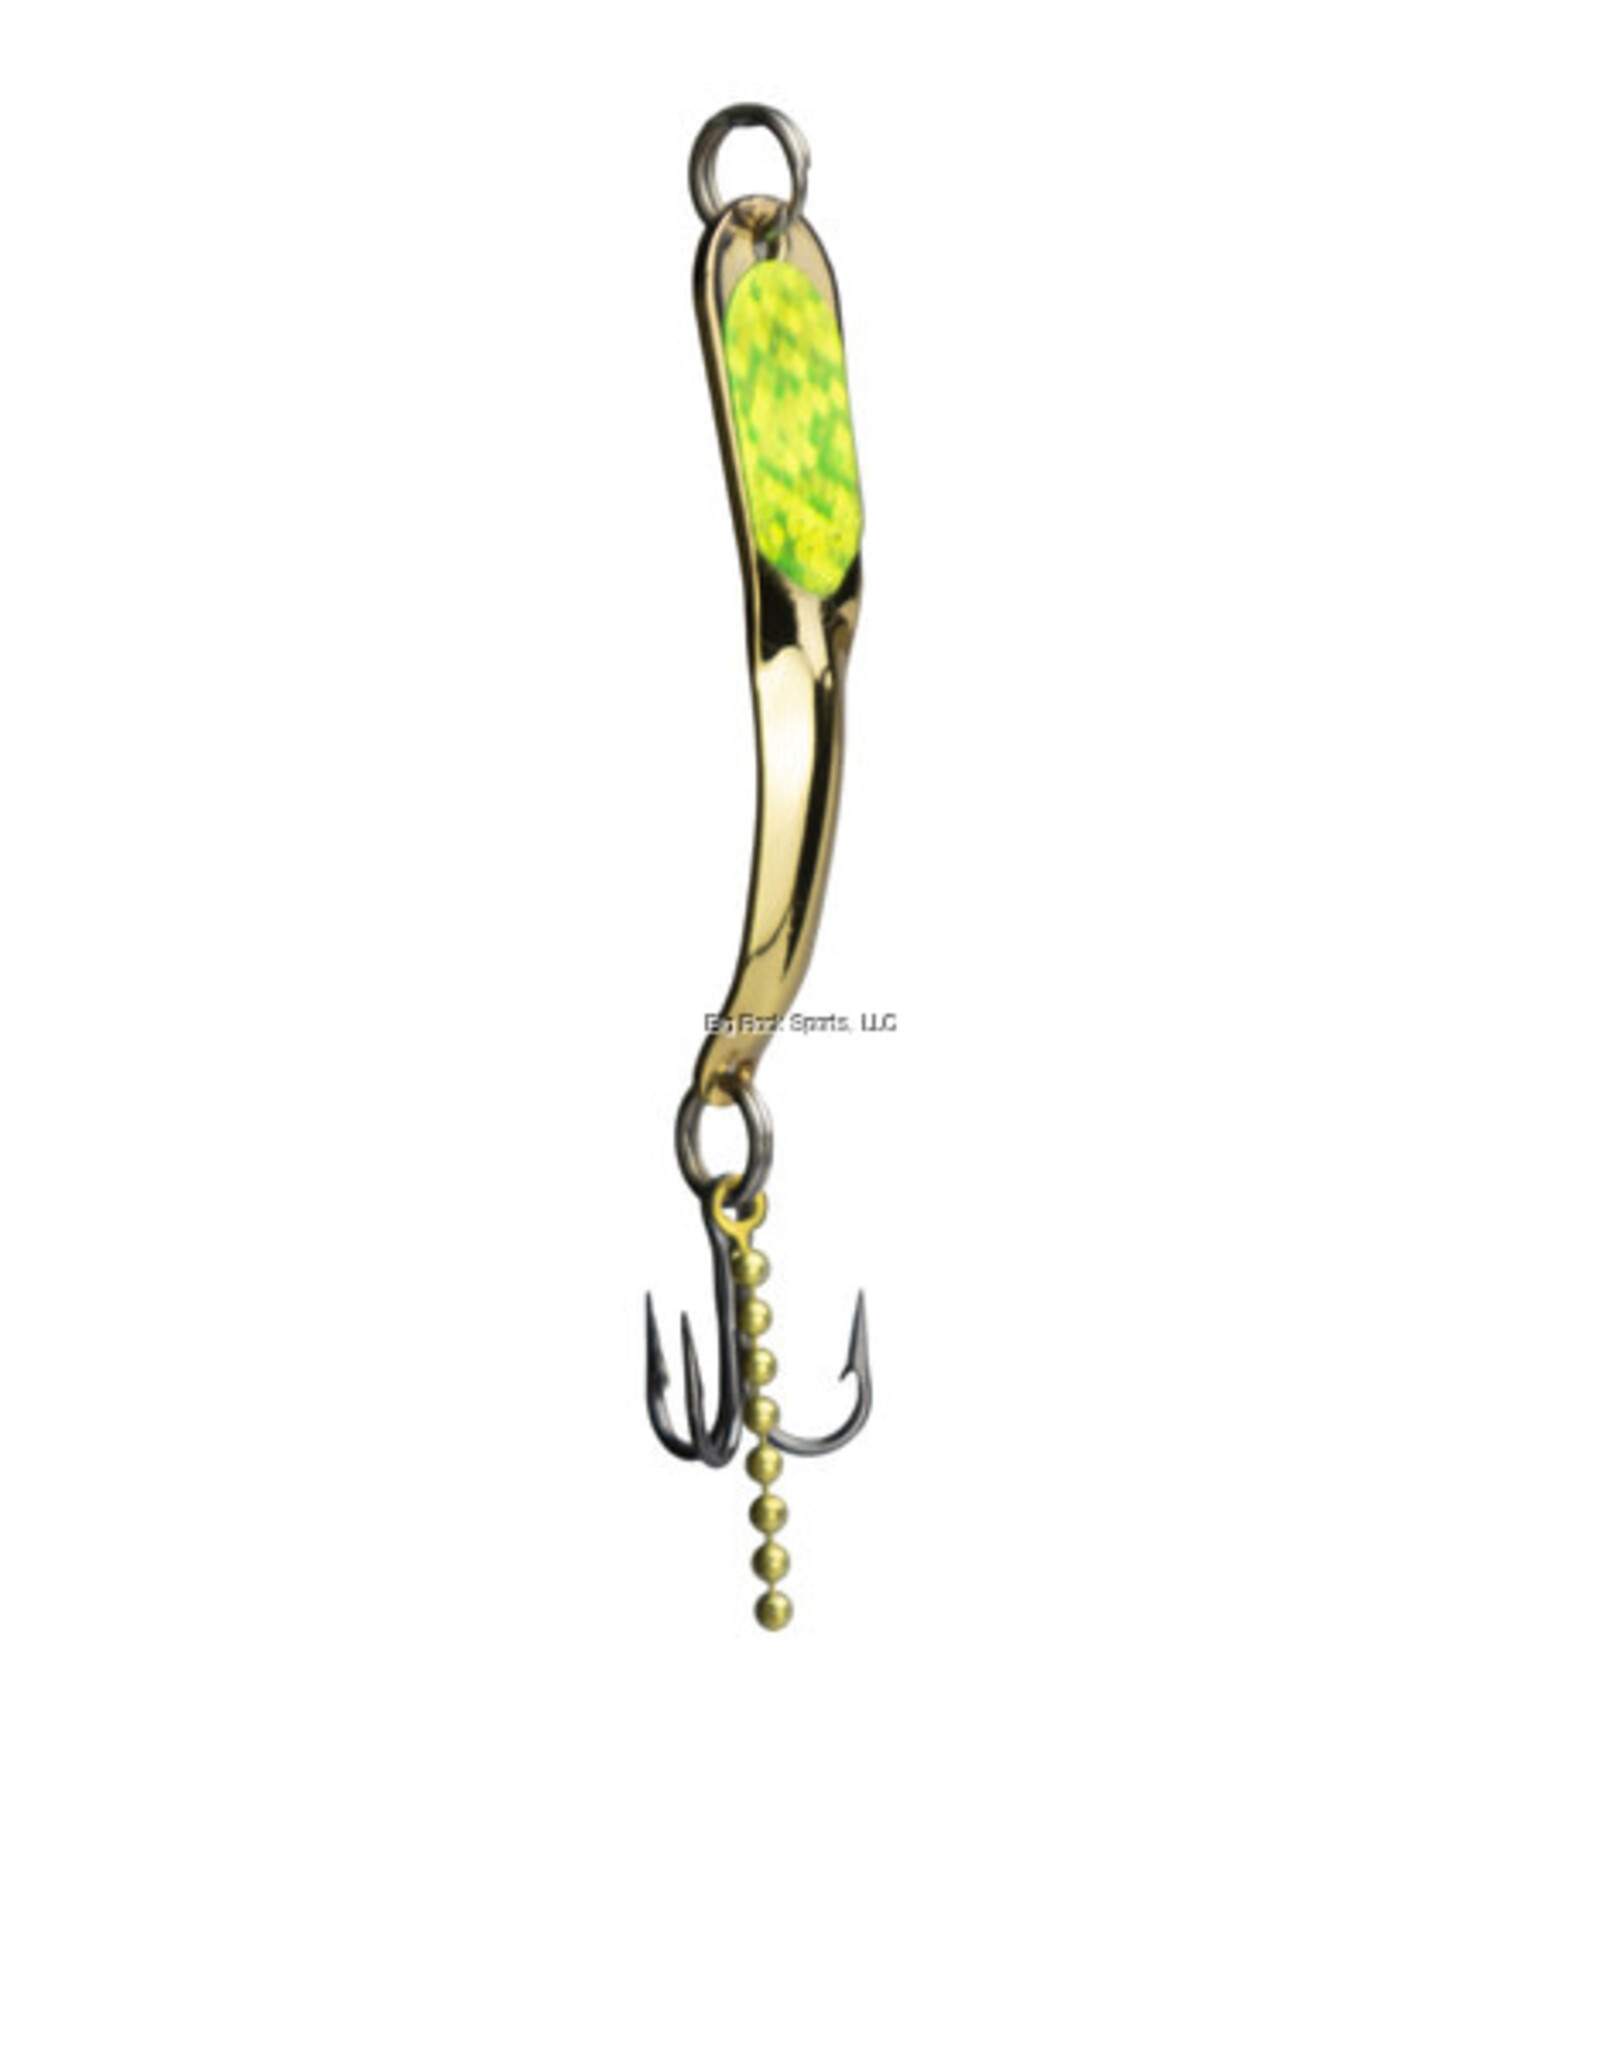 Iron Decoy Steely 1 GCH Steely Spoon Size 1, 1-1/2", 1/12 oz, Gold Chartreuse